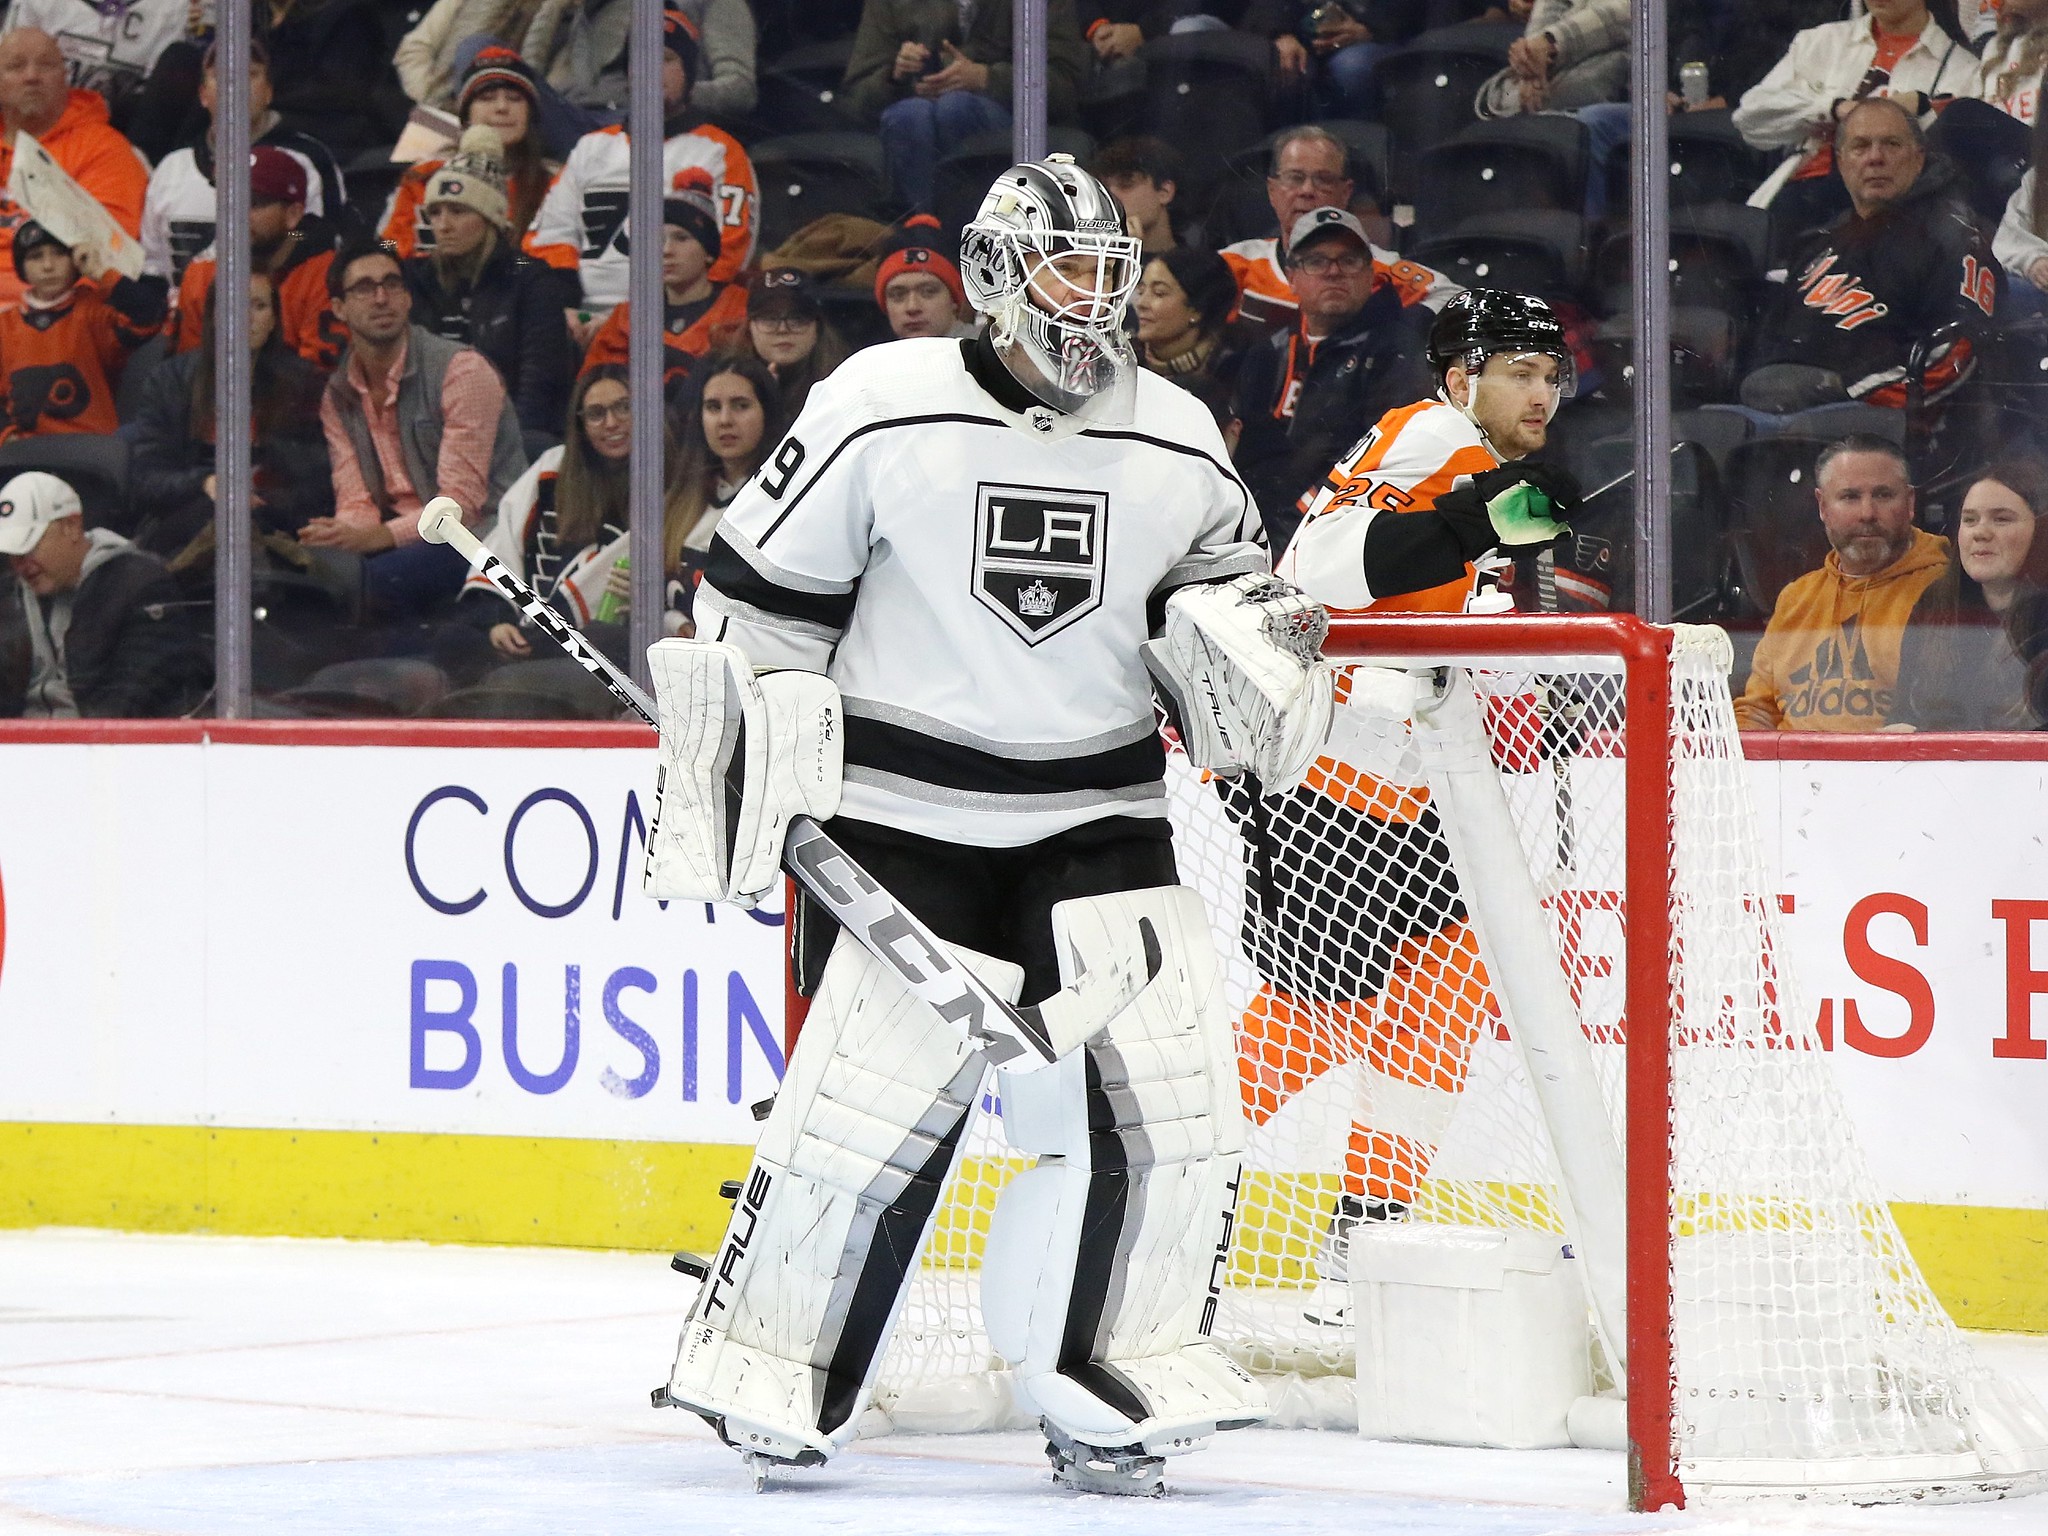 The Kings goalie situation looks solid. Who should be the #1? 